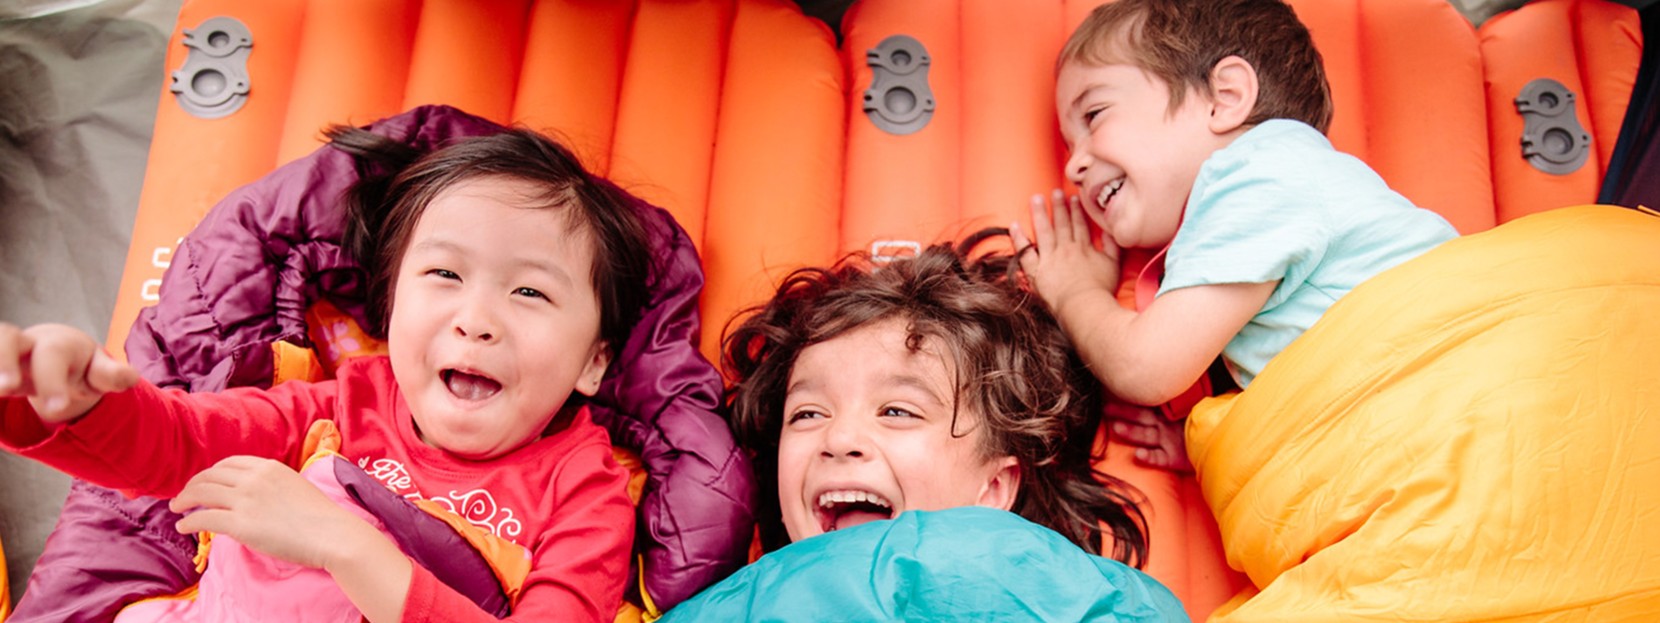 Three children laugh and lay in sleeping bags